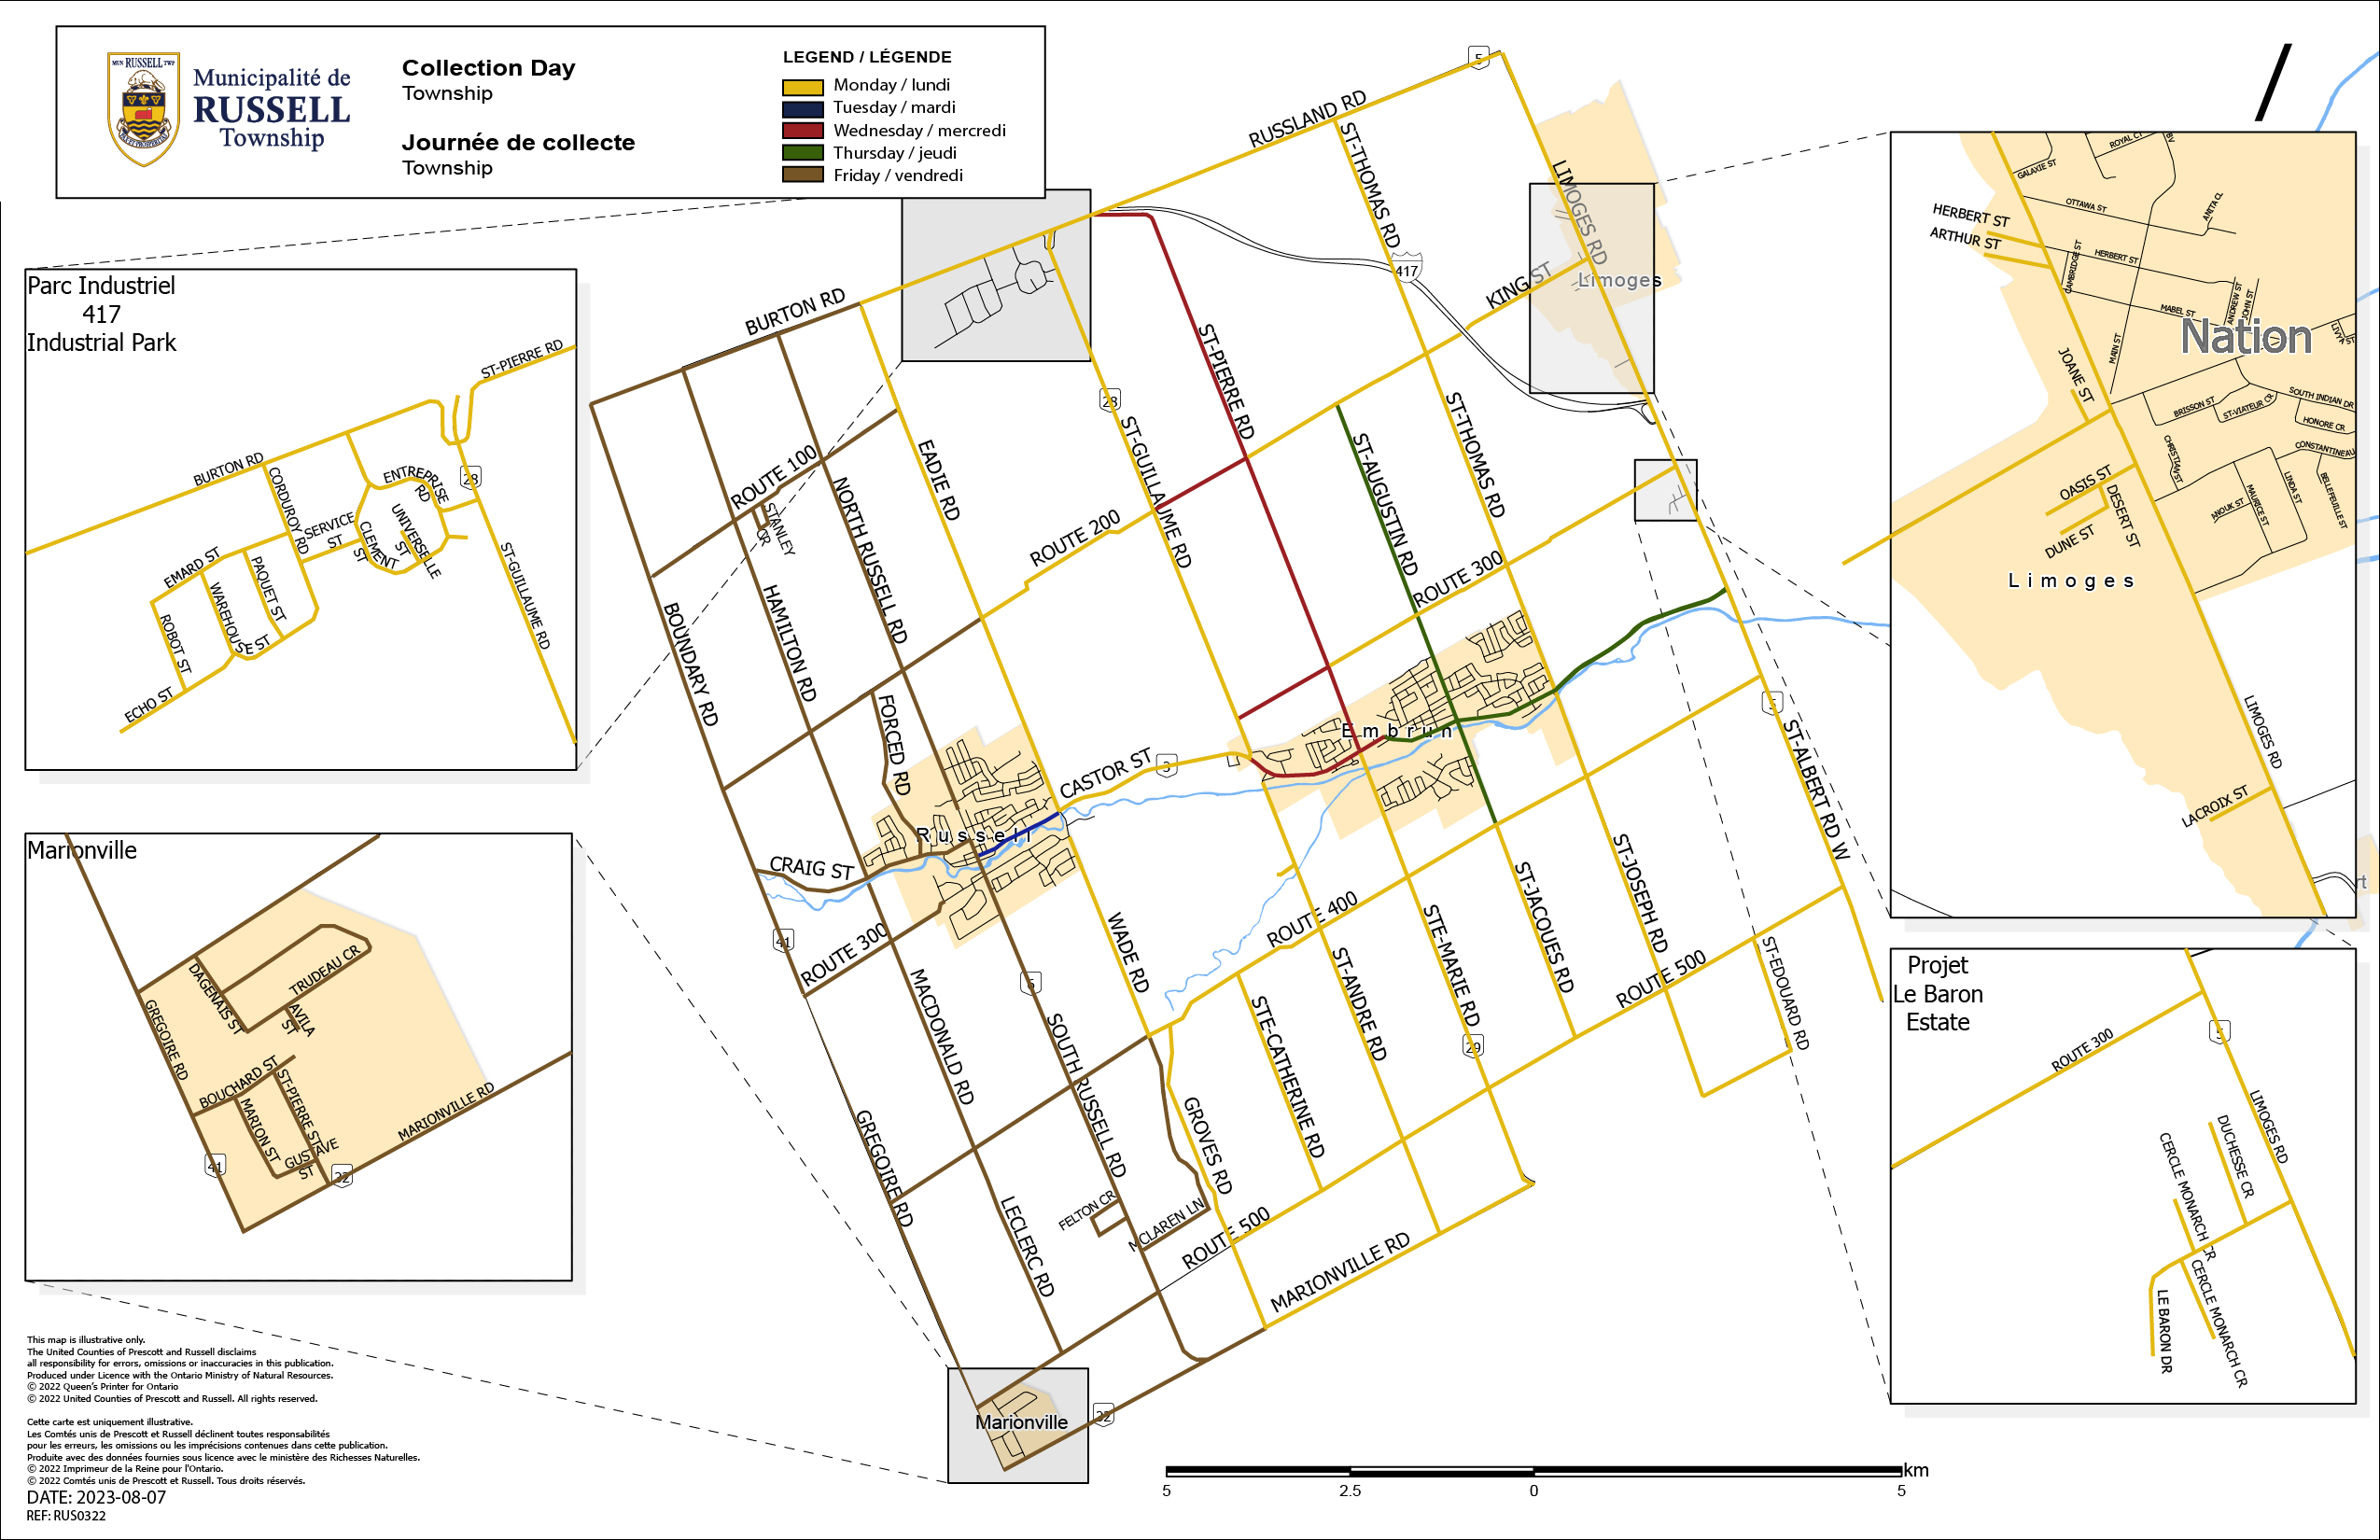 Waste Collection Map for the Township